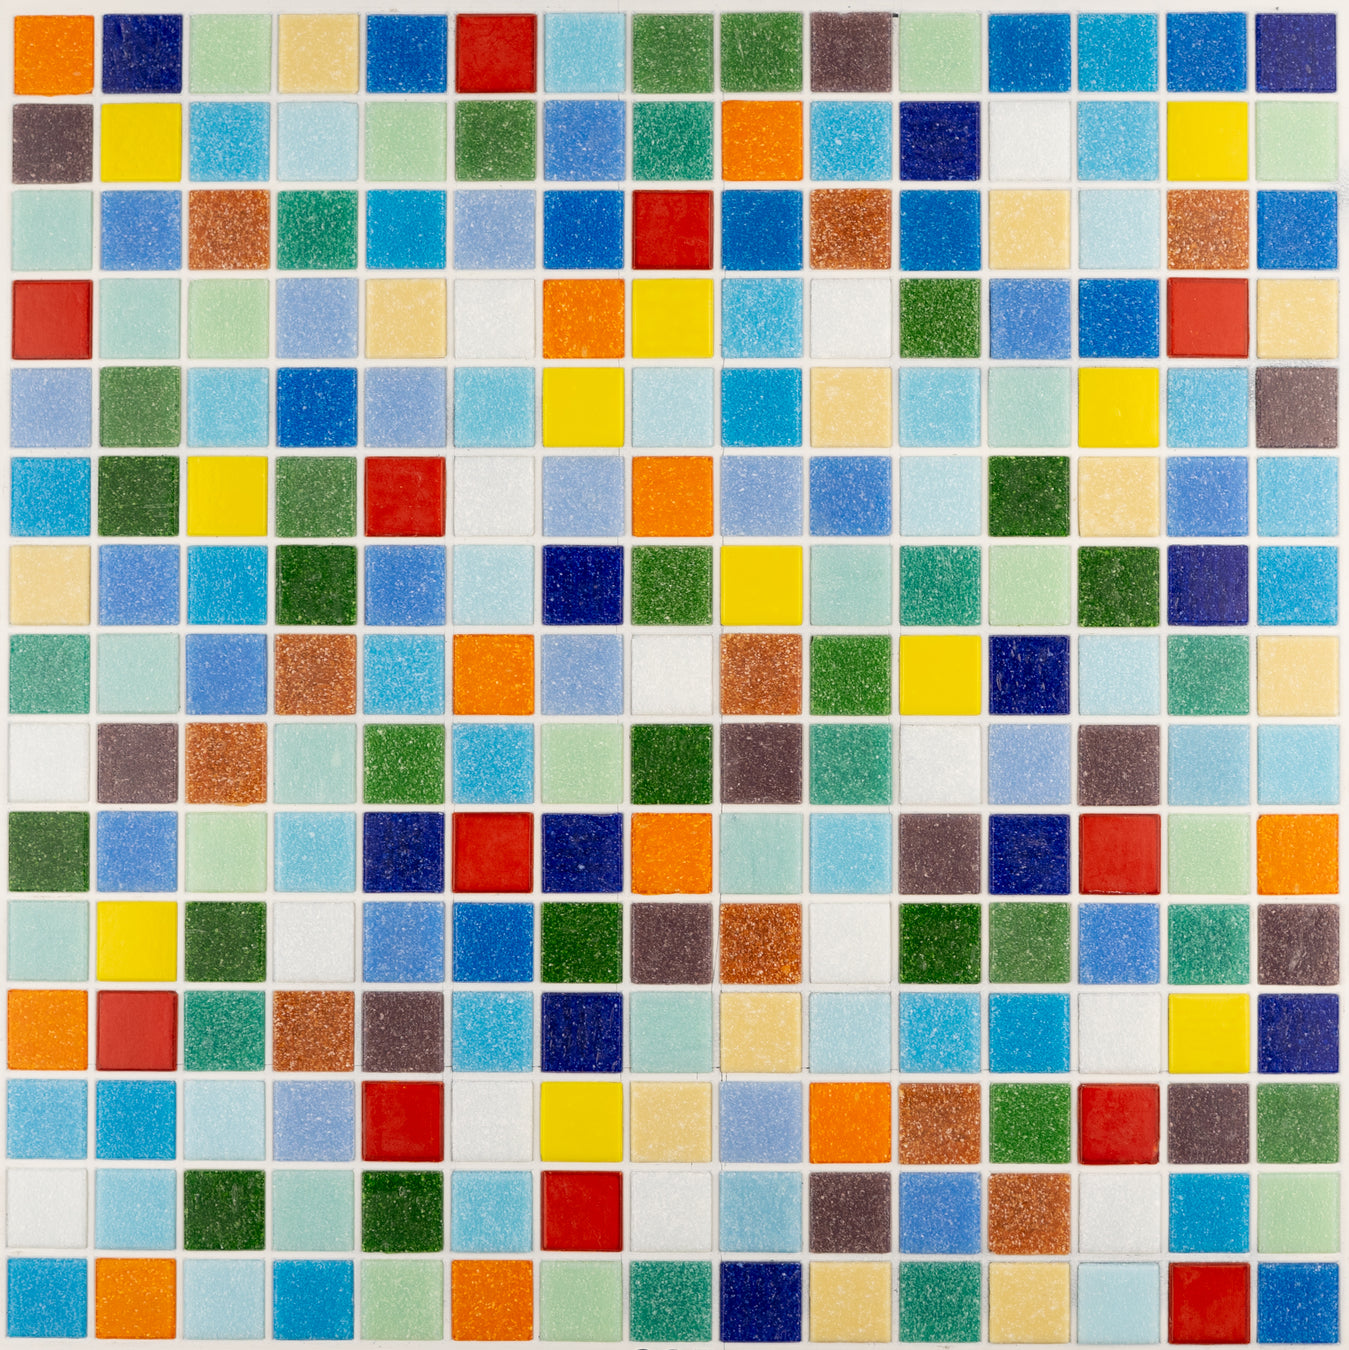 Customizable Brio Glass Mosaic Tile | Create your own custom tile color blend using our 36 color palette. Suitable for kitchens, bathrooms, outdoor applications, showers, backsplashes and pools. A great option for midcentury modern entheusiasts.